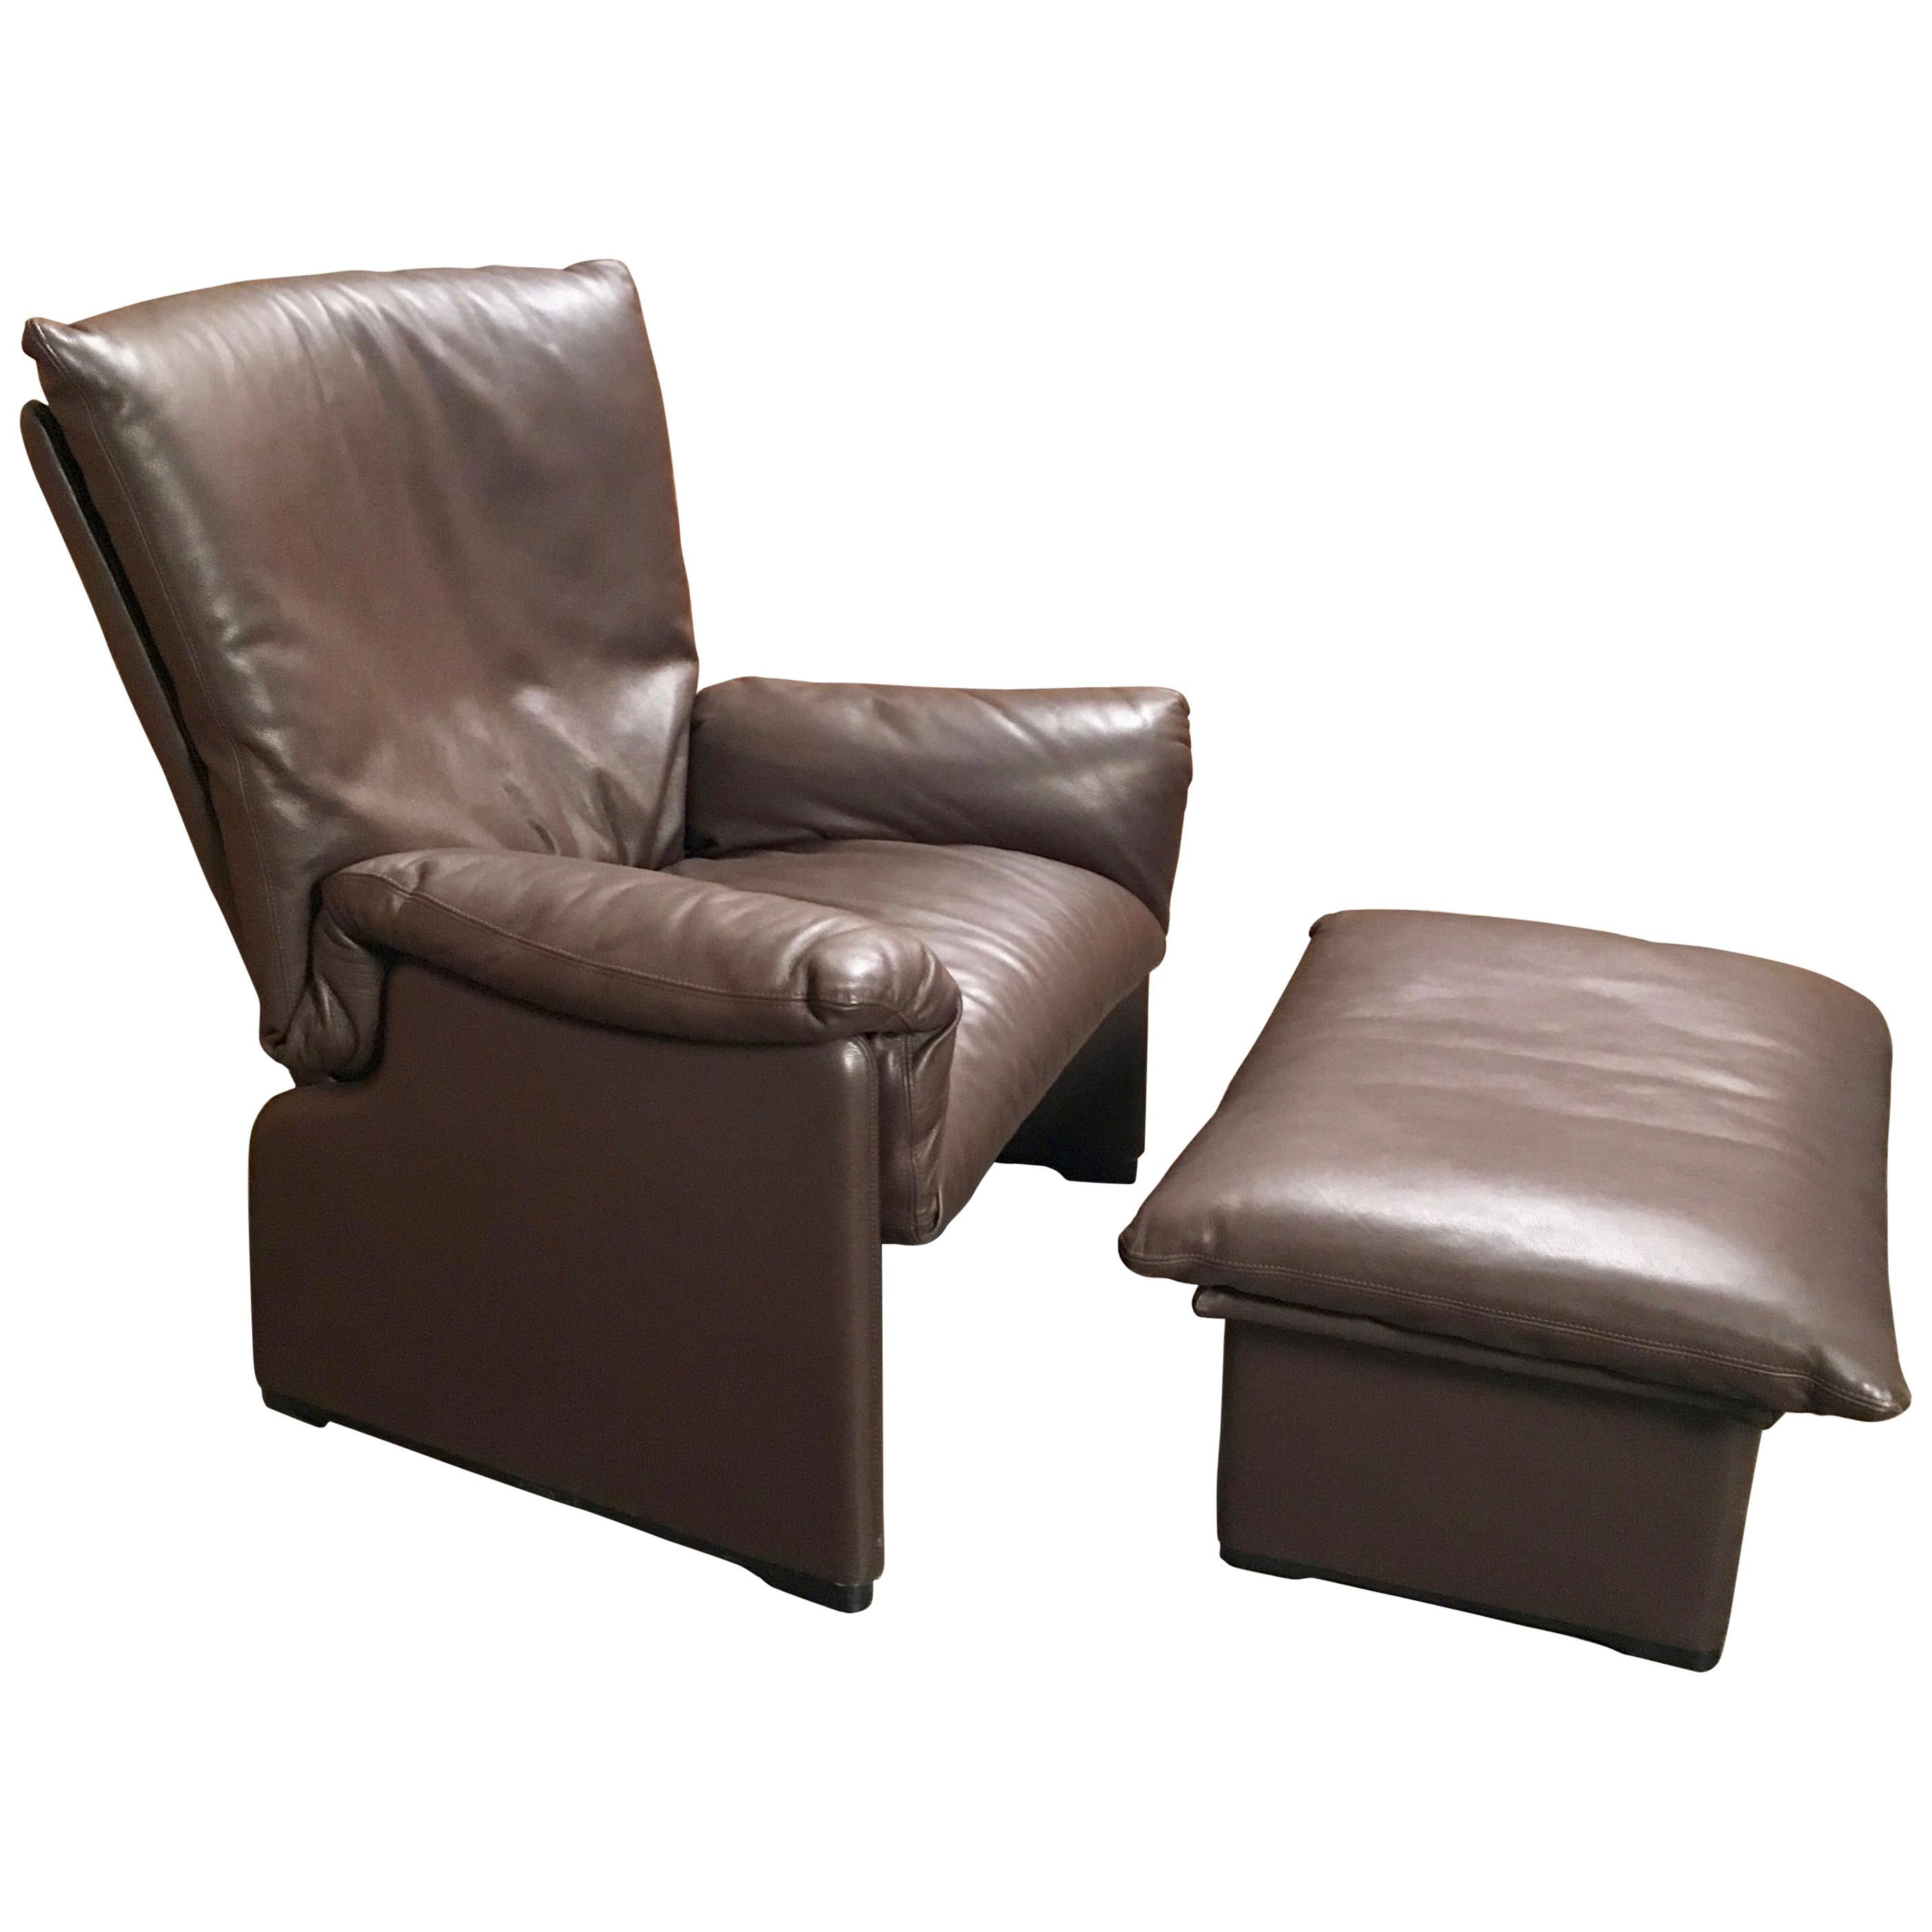 Cassina "Palmaria" Leather Chair and Ottoman